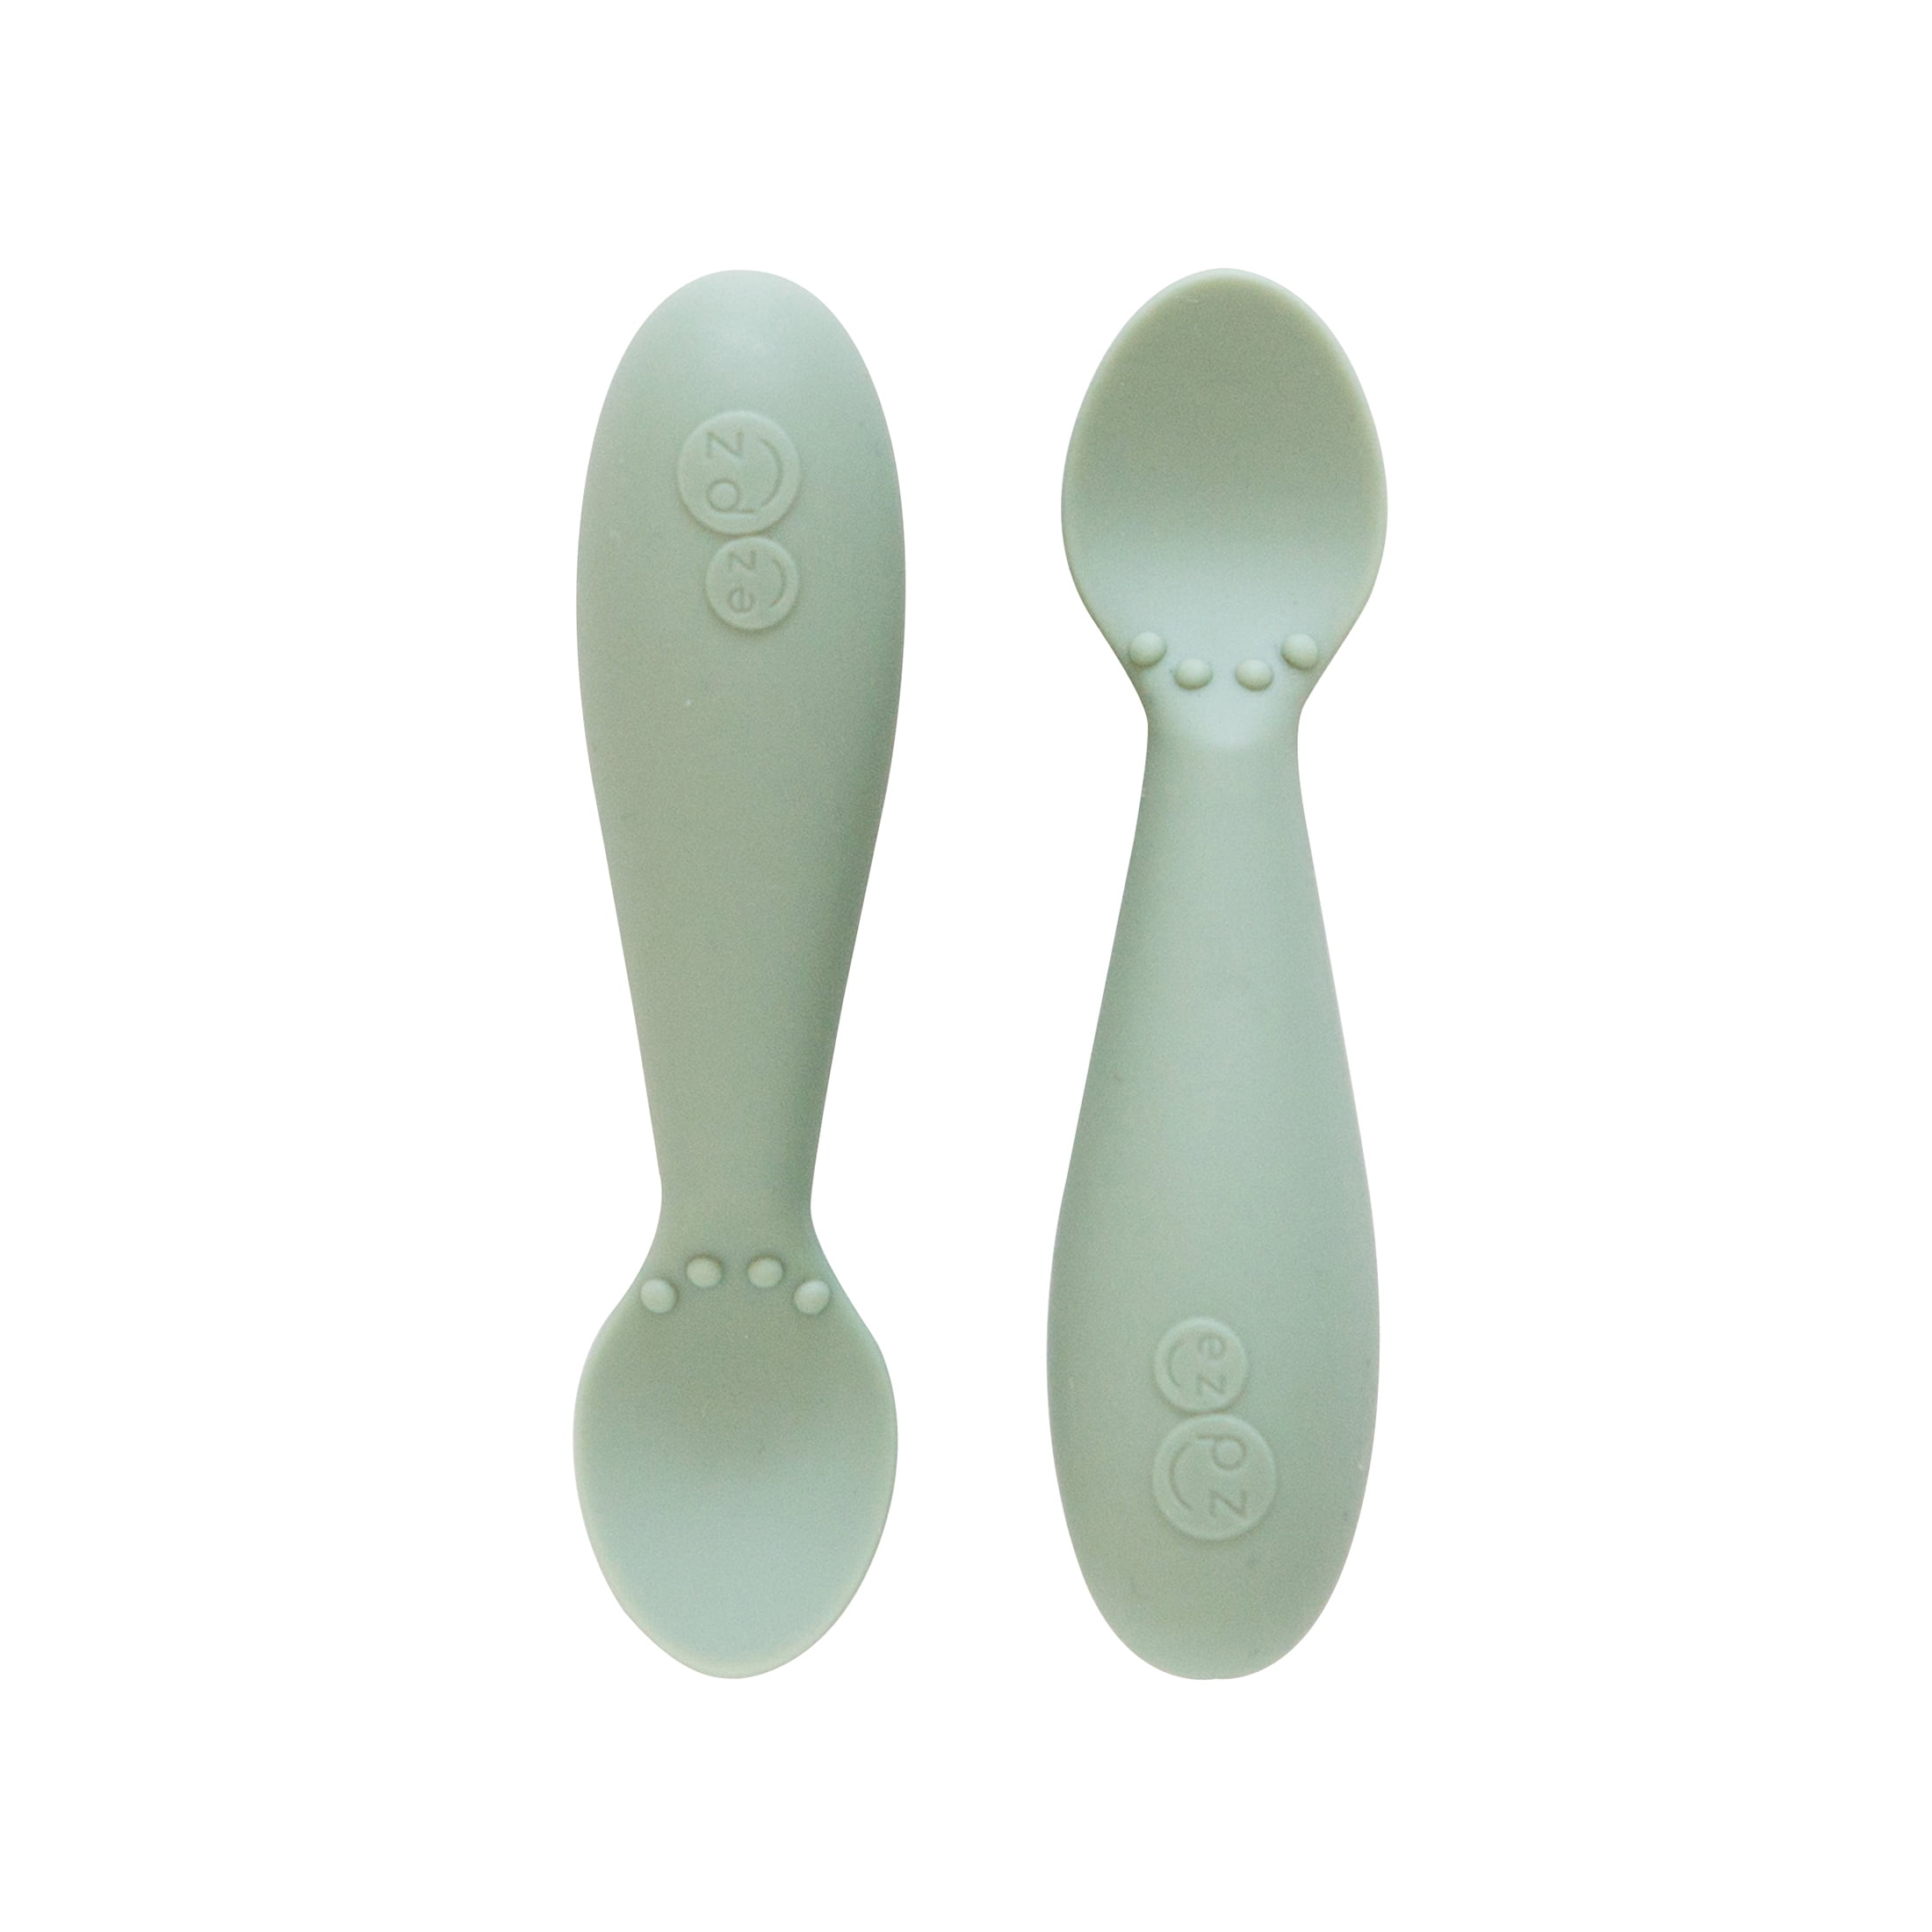 Ezpz Tiny Spoon (2 Pack in Sage) - 100% Silicone Spoons for Baby Led  Weaning + Purees - Designed by a Pediatric Feeding Specialist - 6 Months+